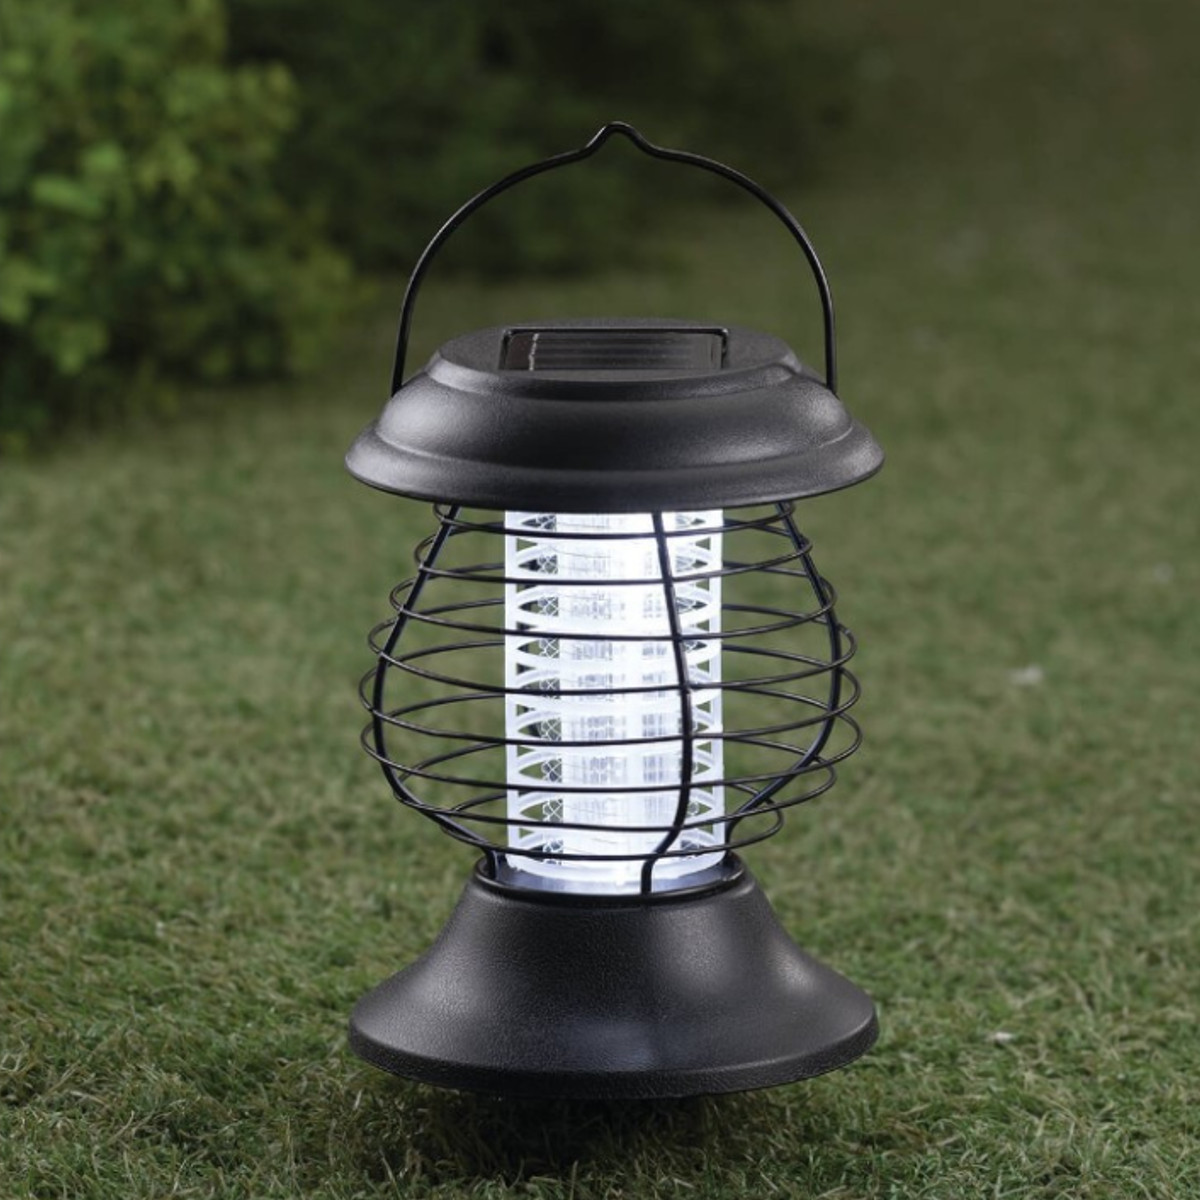 Electric-Fly-Zapper-Mosquito-Insect-Killer-UV-LED-Purple-Tube-Light-Trap-Pest-Solar-IP65-Working-8-H-1693978-5